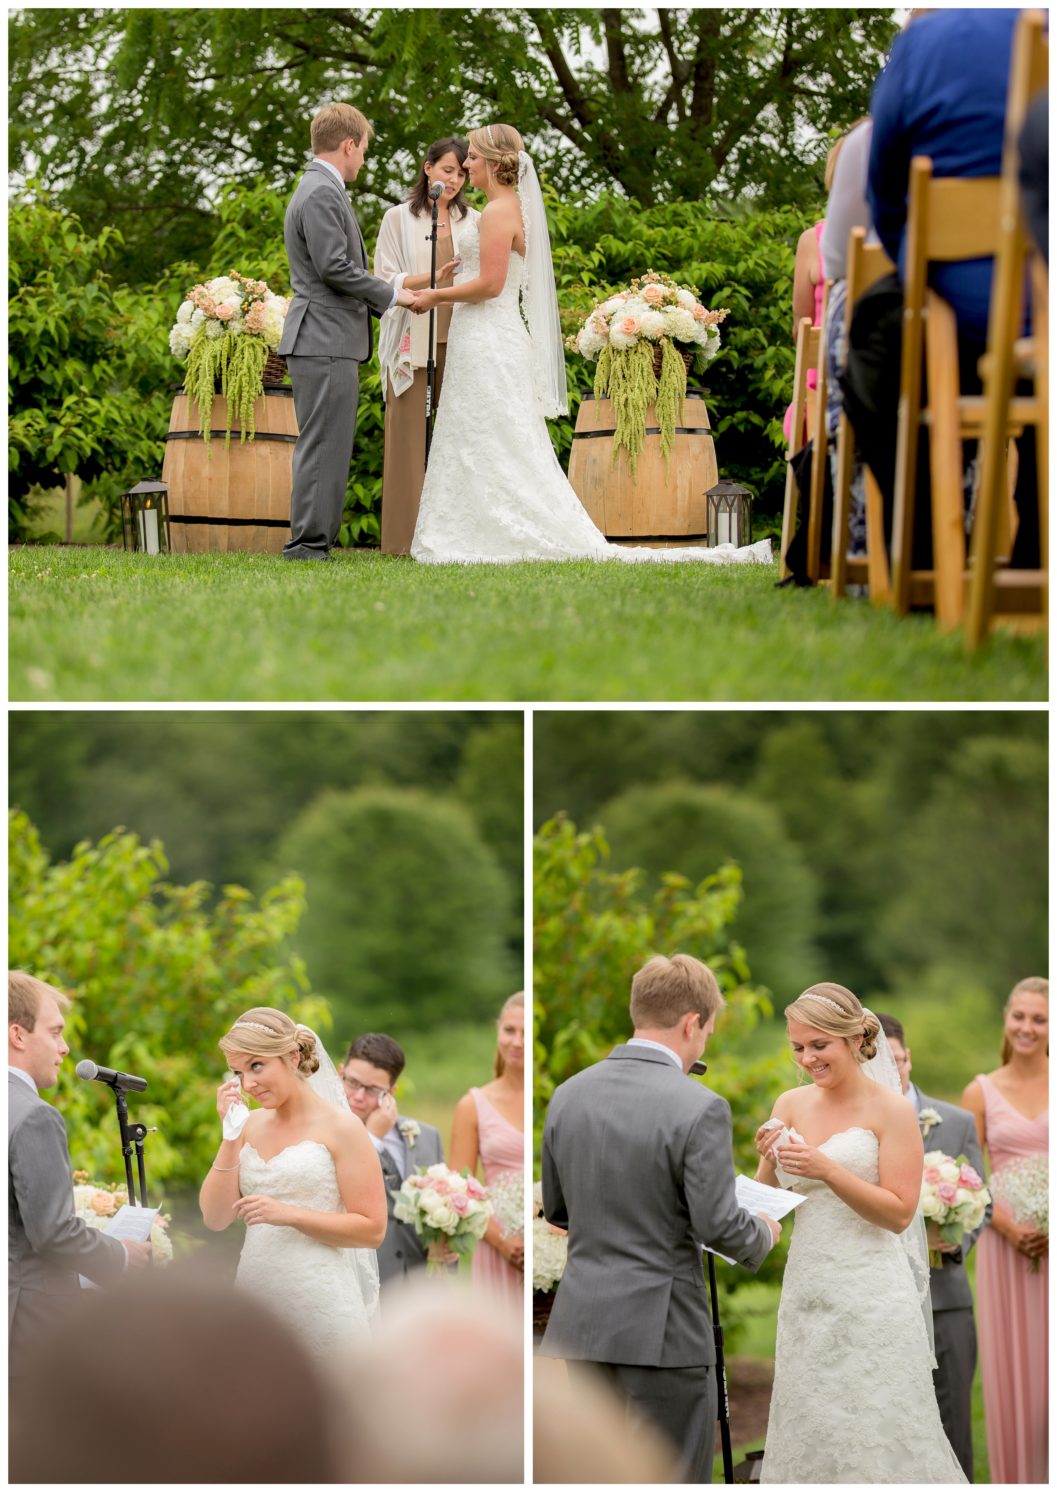 Rustic Wedding Ceremony at QuonQuont Farm in Whately MA